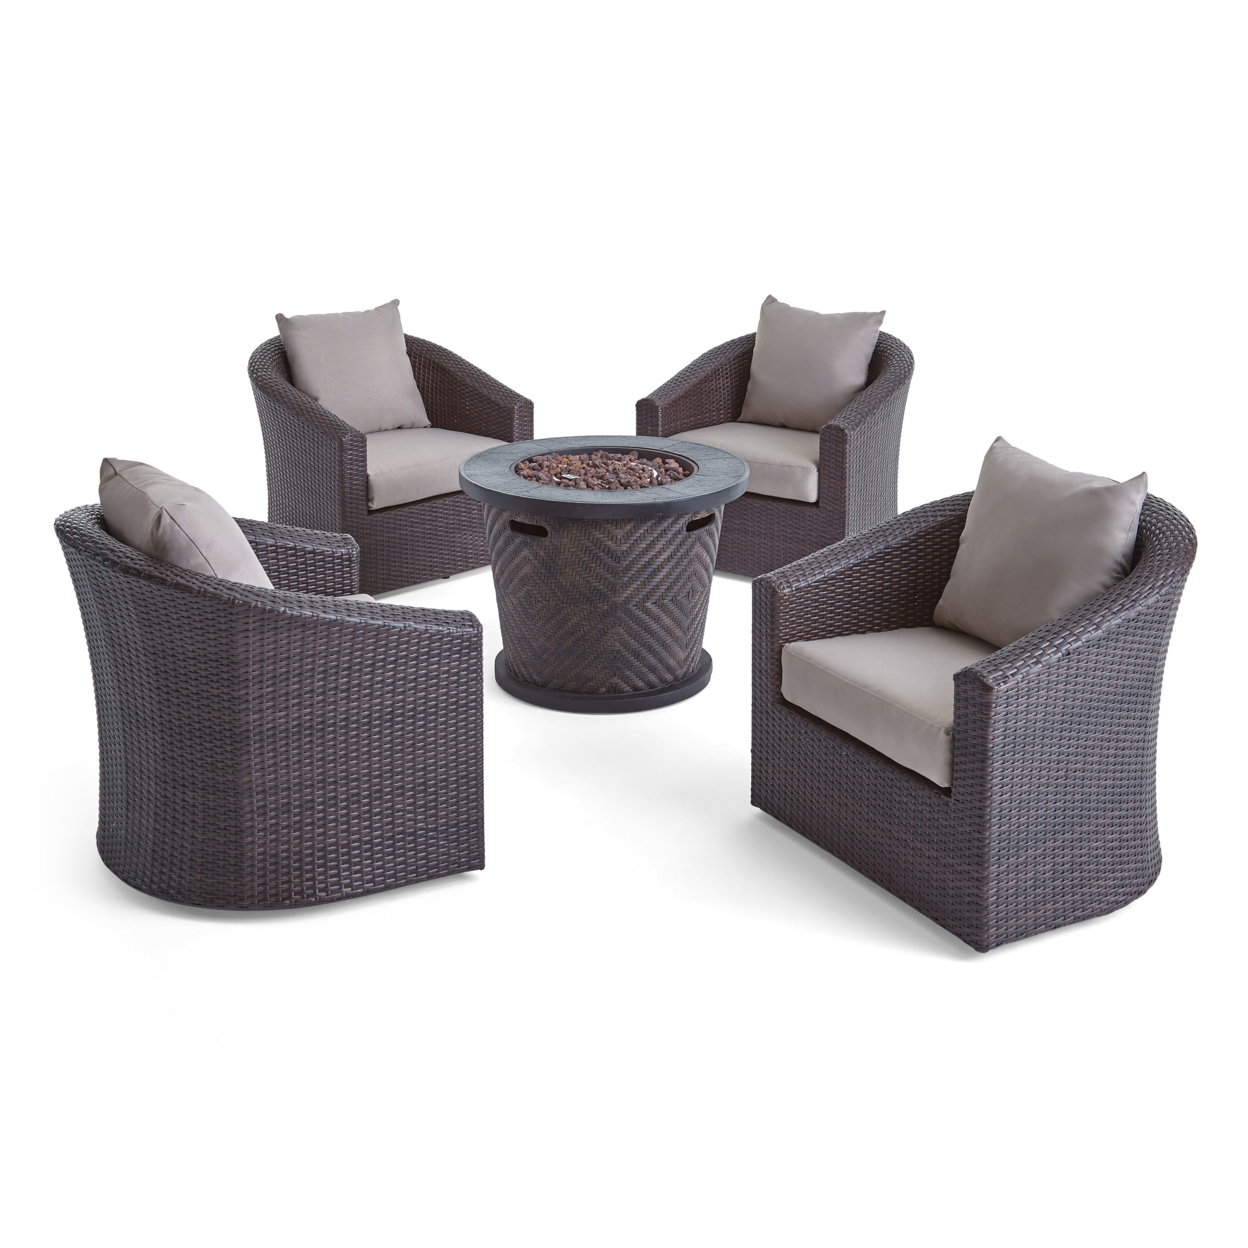 Liyam Outdoor 4 Piece Wicker Swivel Chair Set With Fire Pit, Multi Brown And Brown